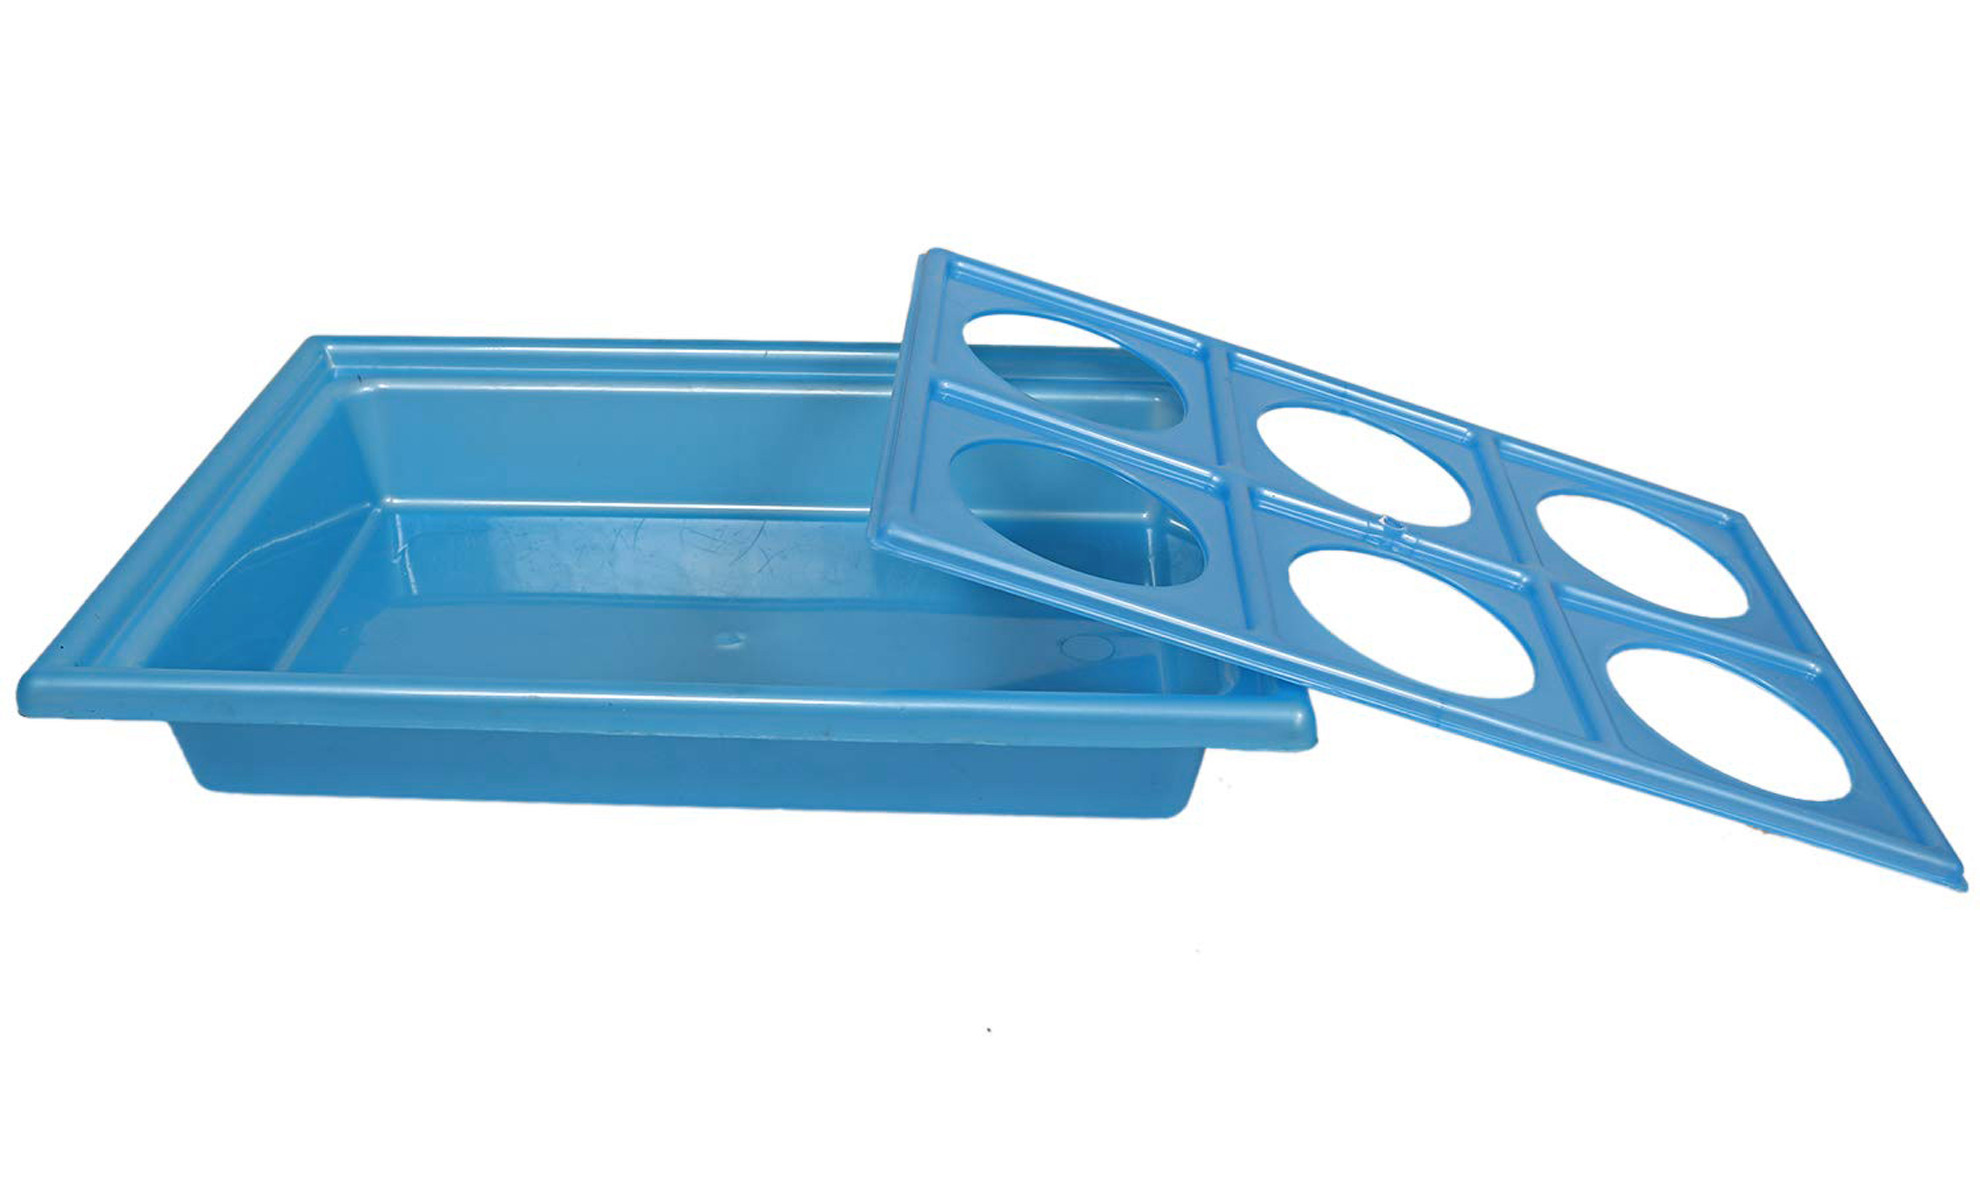 Kuber Industries Tray with Cutout Handles, Cup Display for Kitchenware, Plastic Glass Holder, One Size, 6 Slots-Pack of 2 (Blue & White)